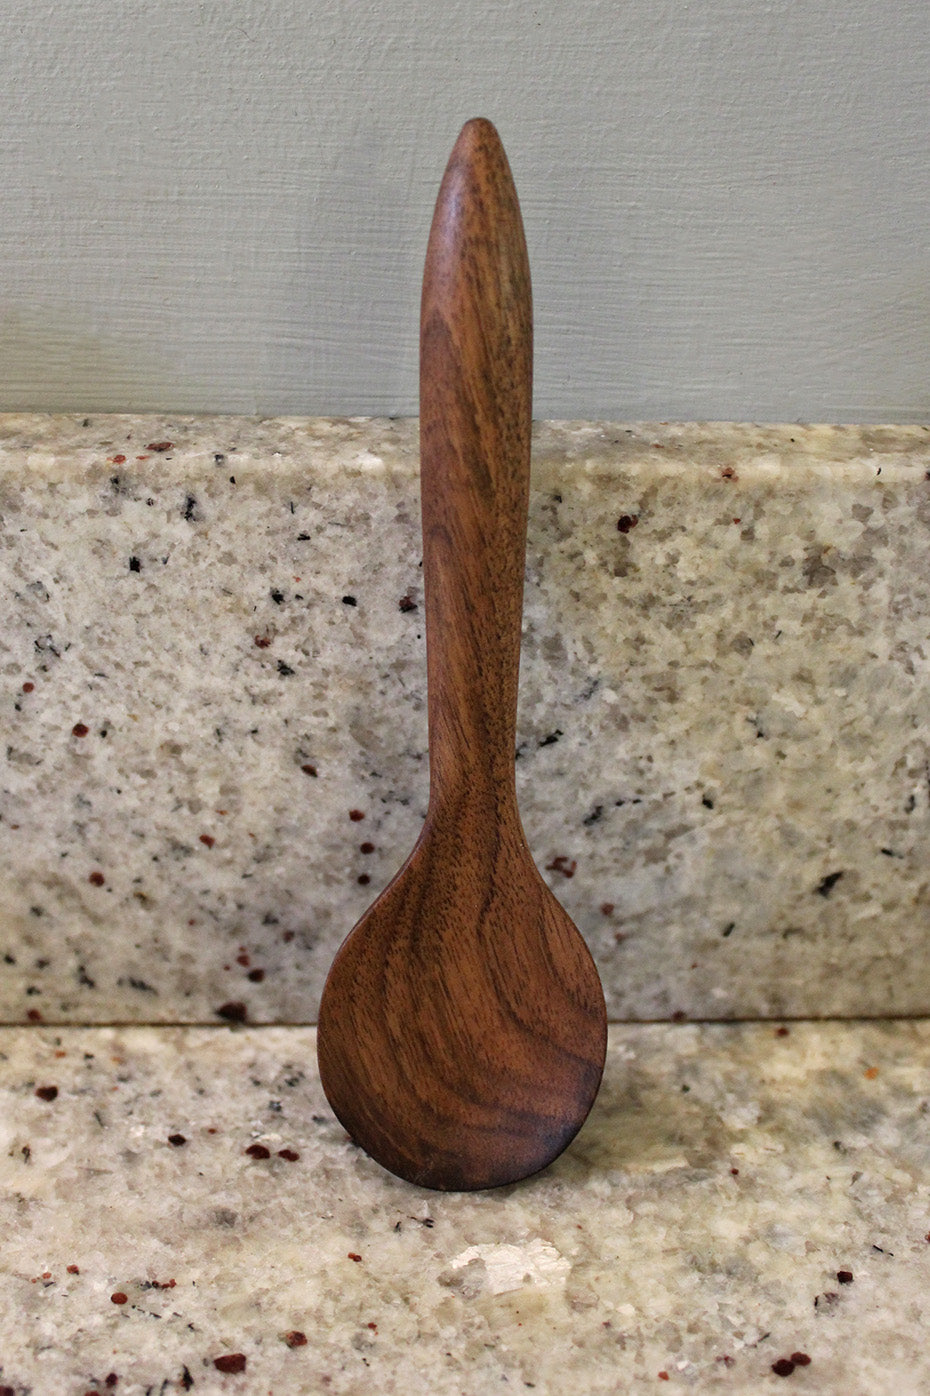 Spice spoon hand carved from Walnut, in Fife. Scottish Textiles Showcase.